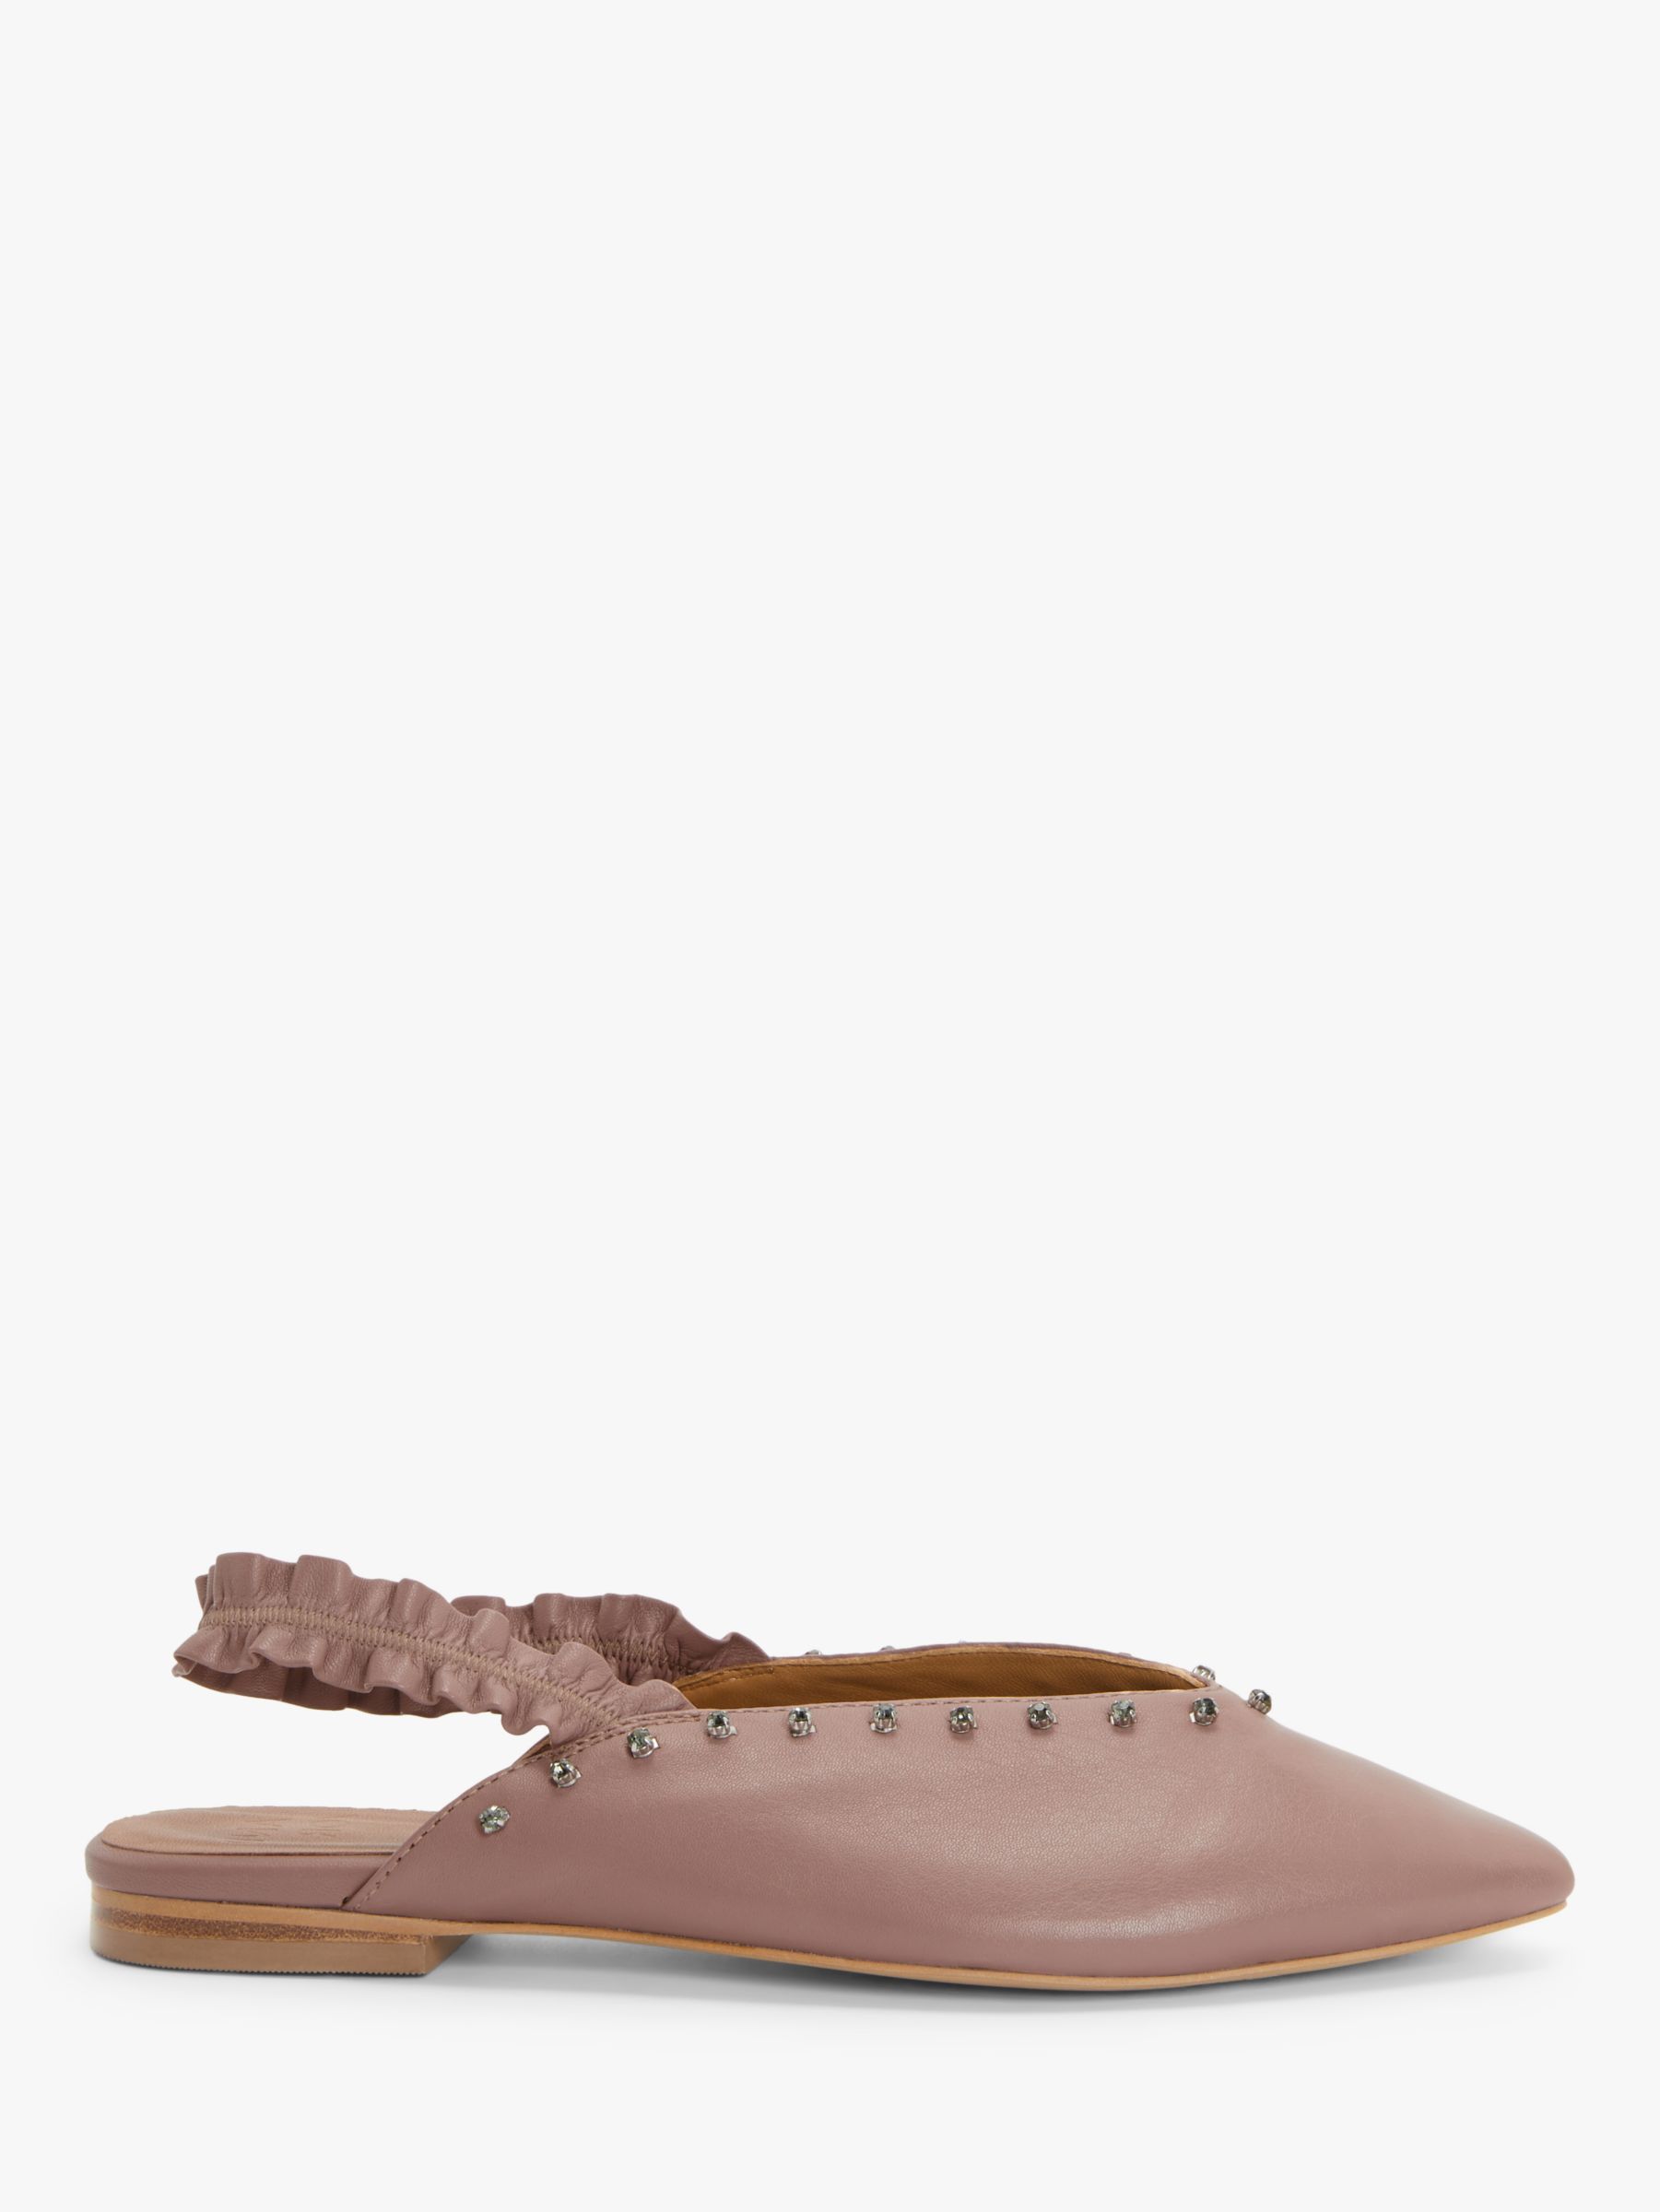 AND/OR Harlow Leather Slingback Studded Flat Pumps, Pink